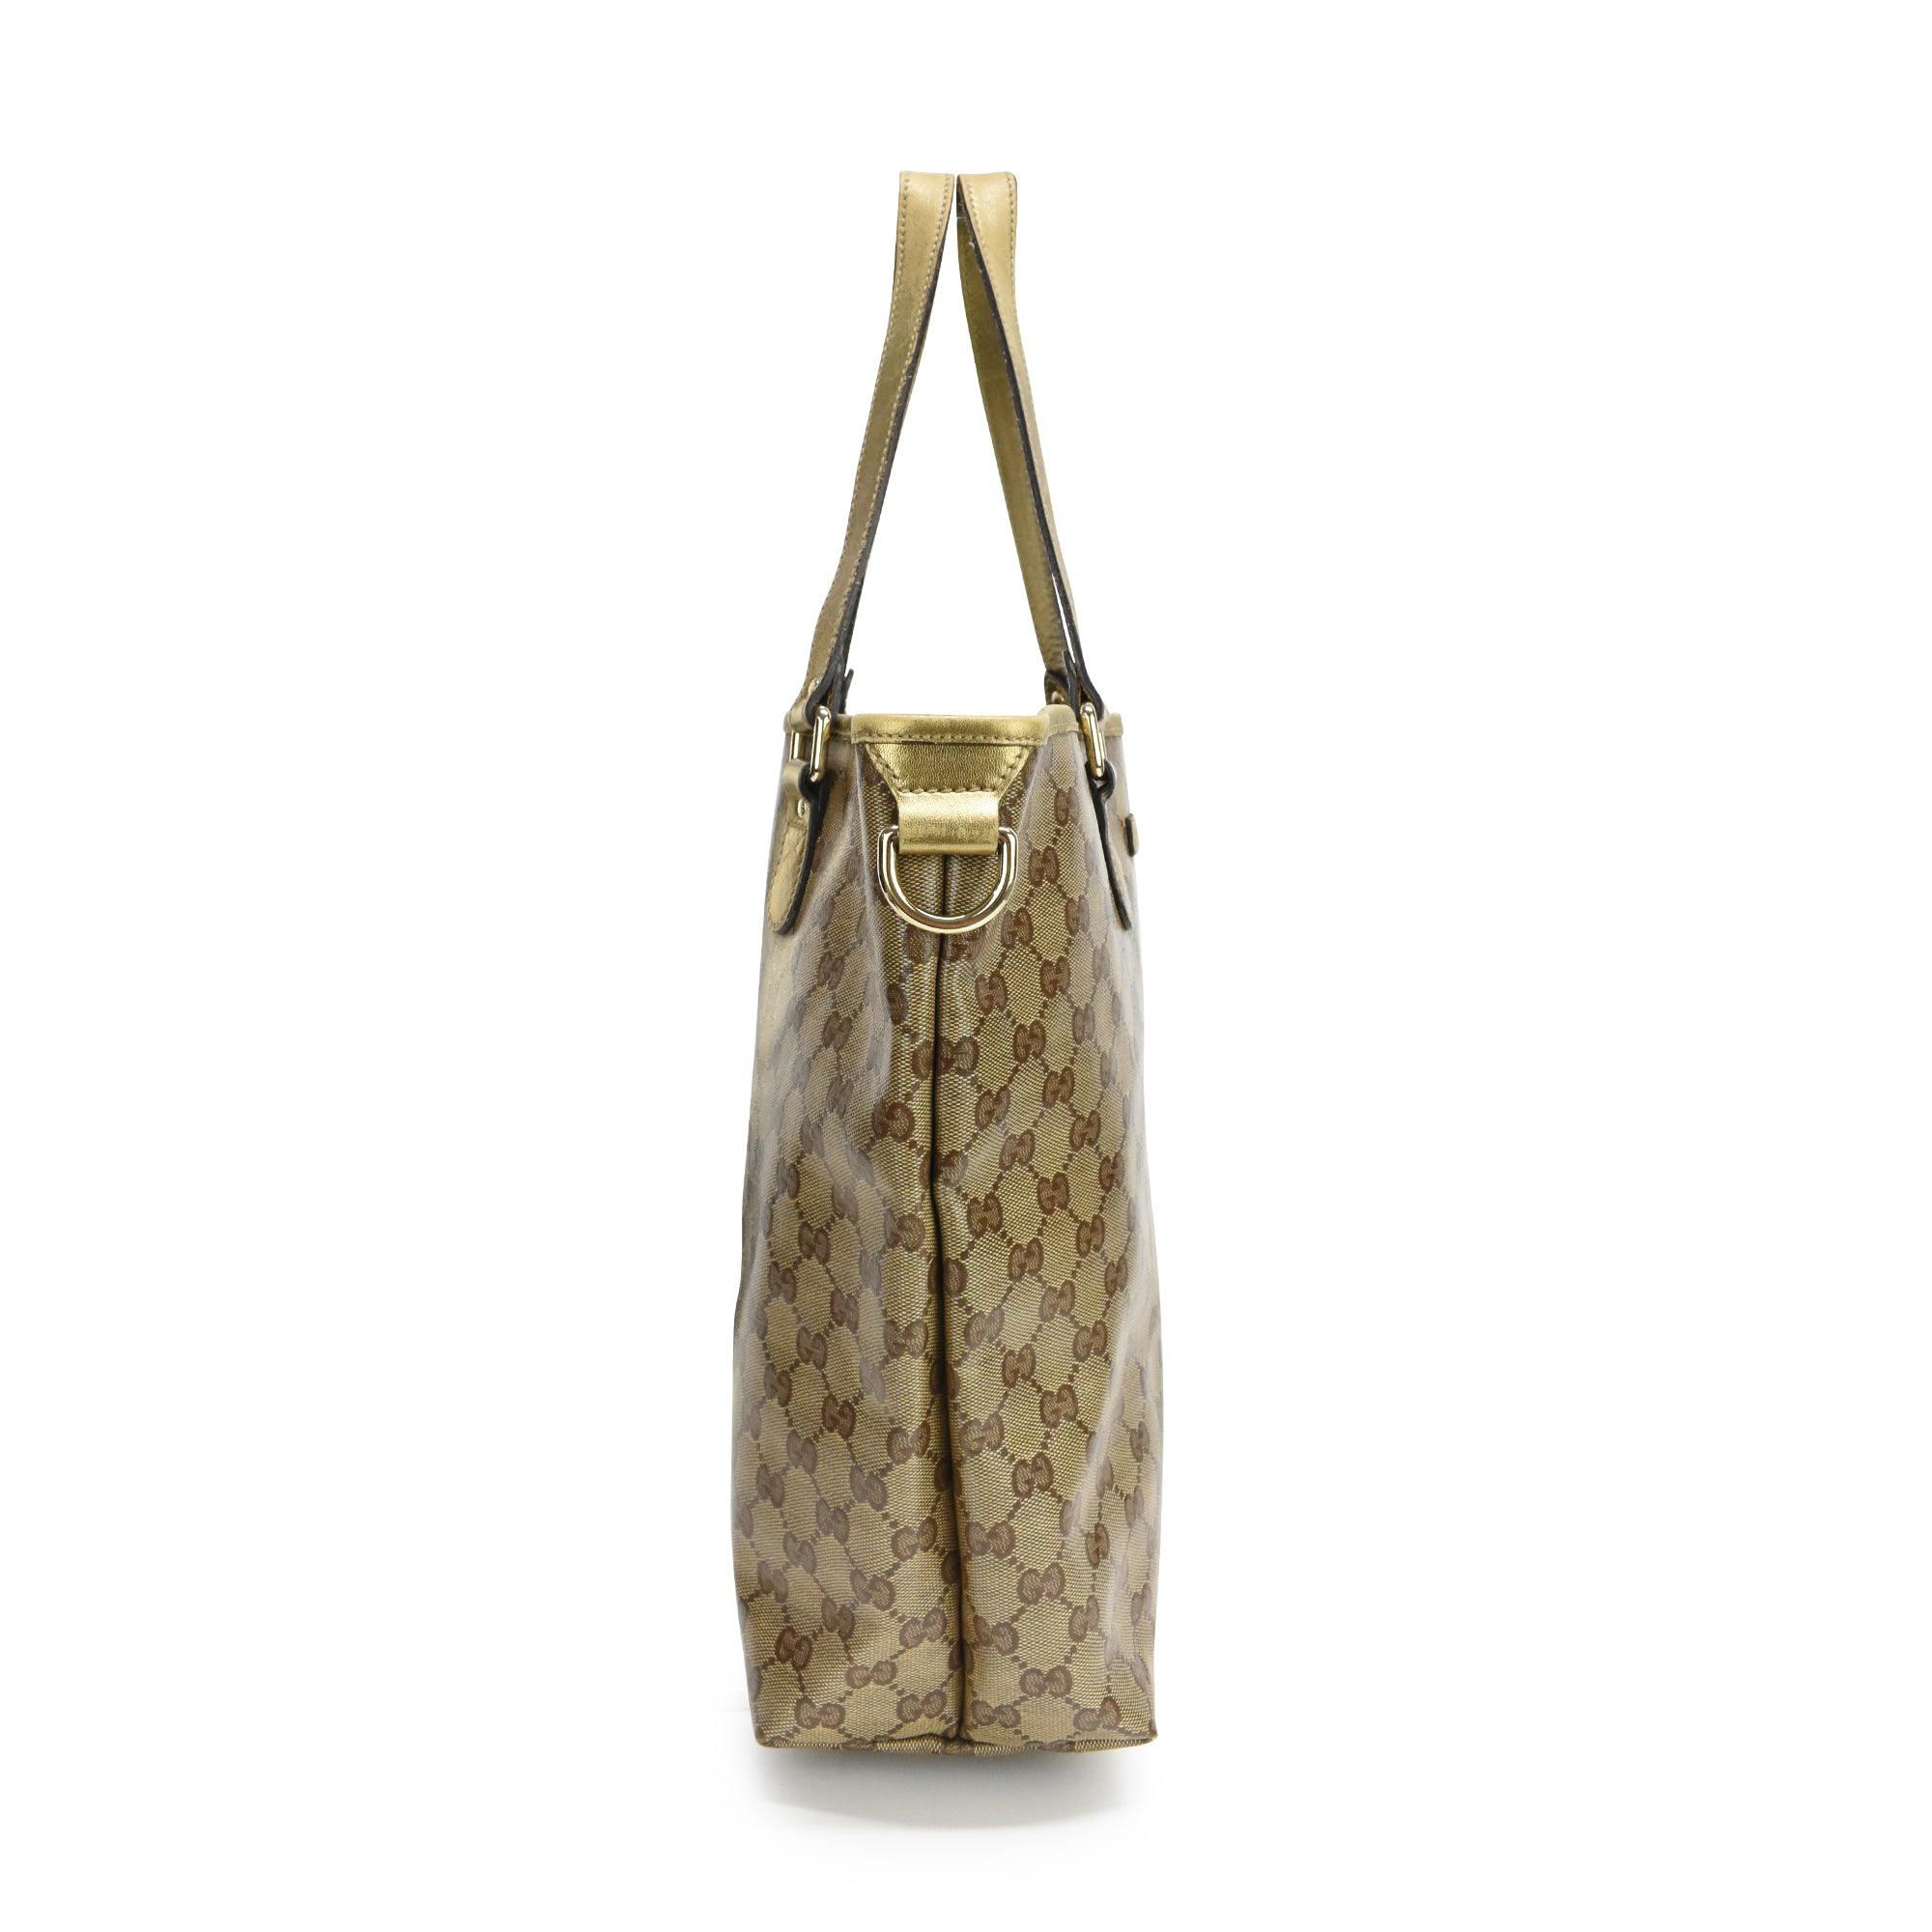 Gucci Tote Bag - Fashionably Yours